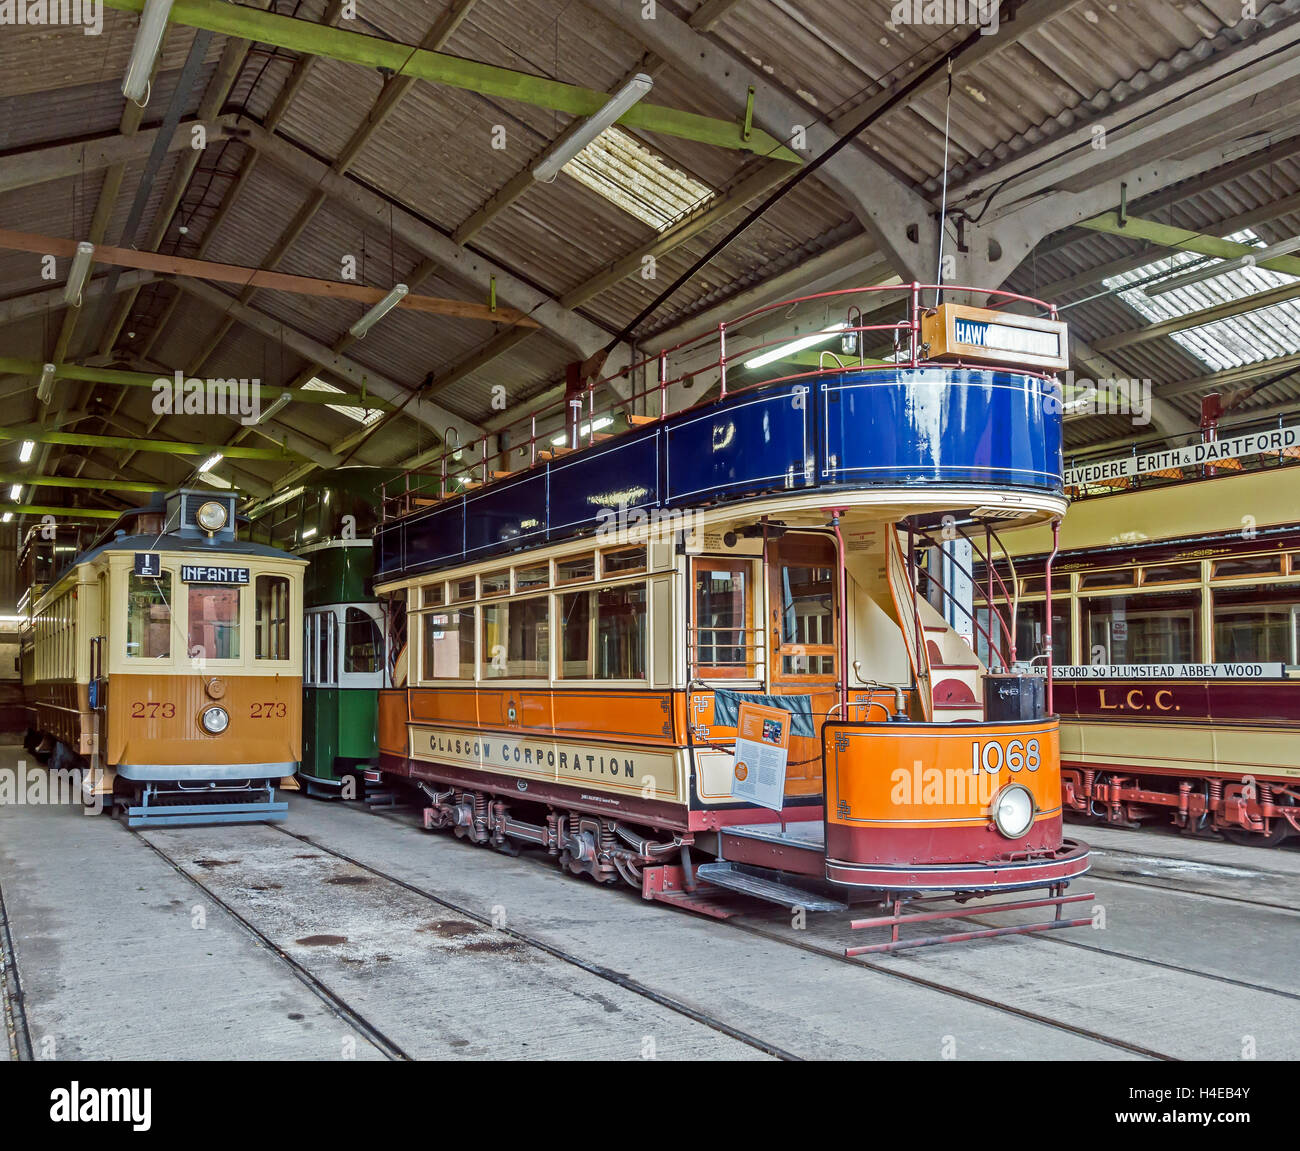 Trams including Glasgow Corporation 1068 at the Tram Depot at Crich Tramway Village  Crich Matlock Derbyshire England Stock Photo